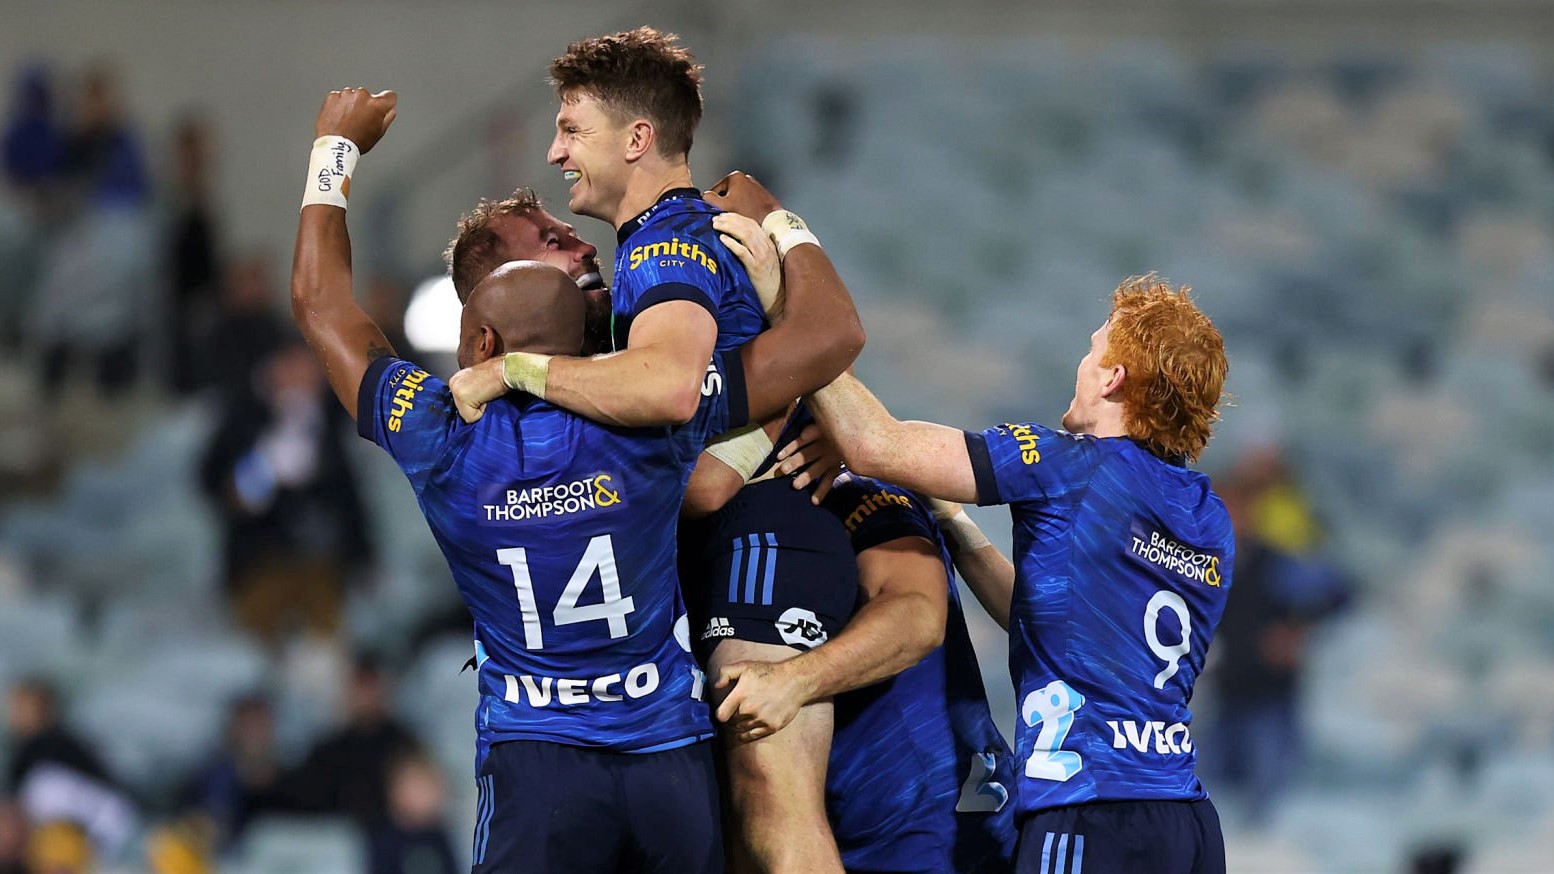 CANBERRA, AUSTRALIA - MAY 21: Beauden Barrett of the Blues celebrates kicking a field goal on full time to win the round 14 Super Rugby Pacific match between the ACT Brumbies and the Blues at GIO Stadium on May 21, 2022 in Canberra, Australia. (Photo by Mark Nolan/Getty Images)